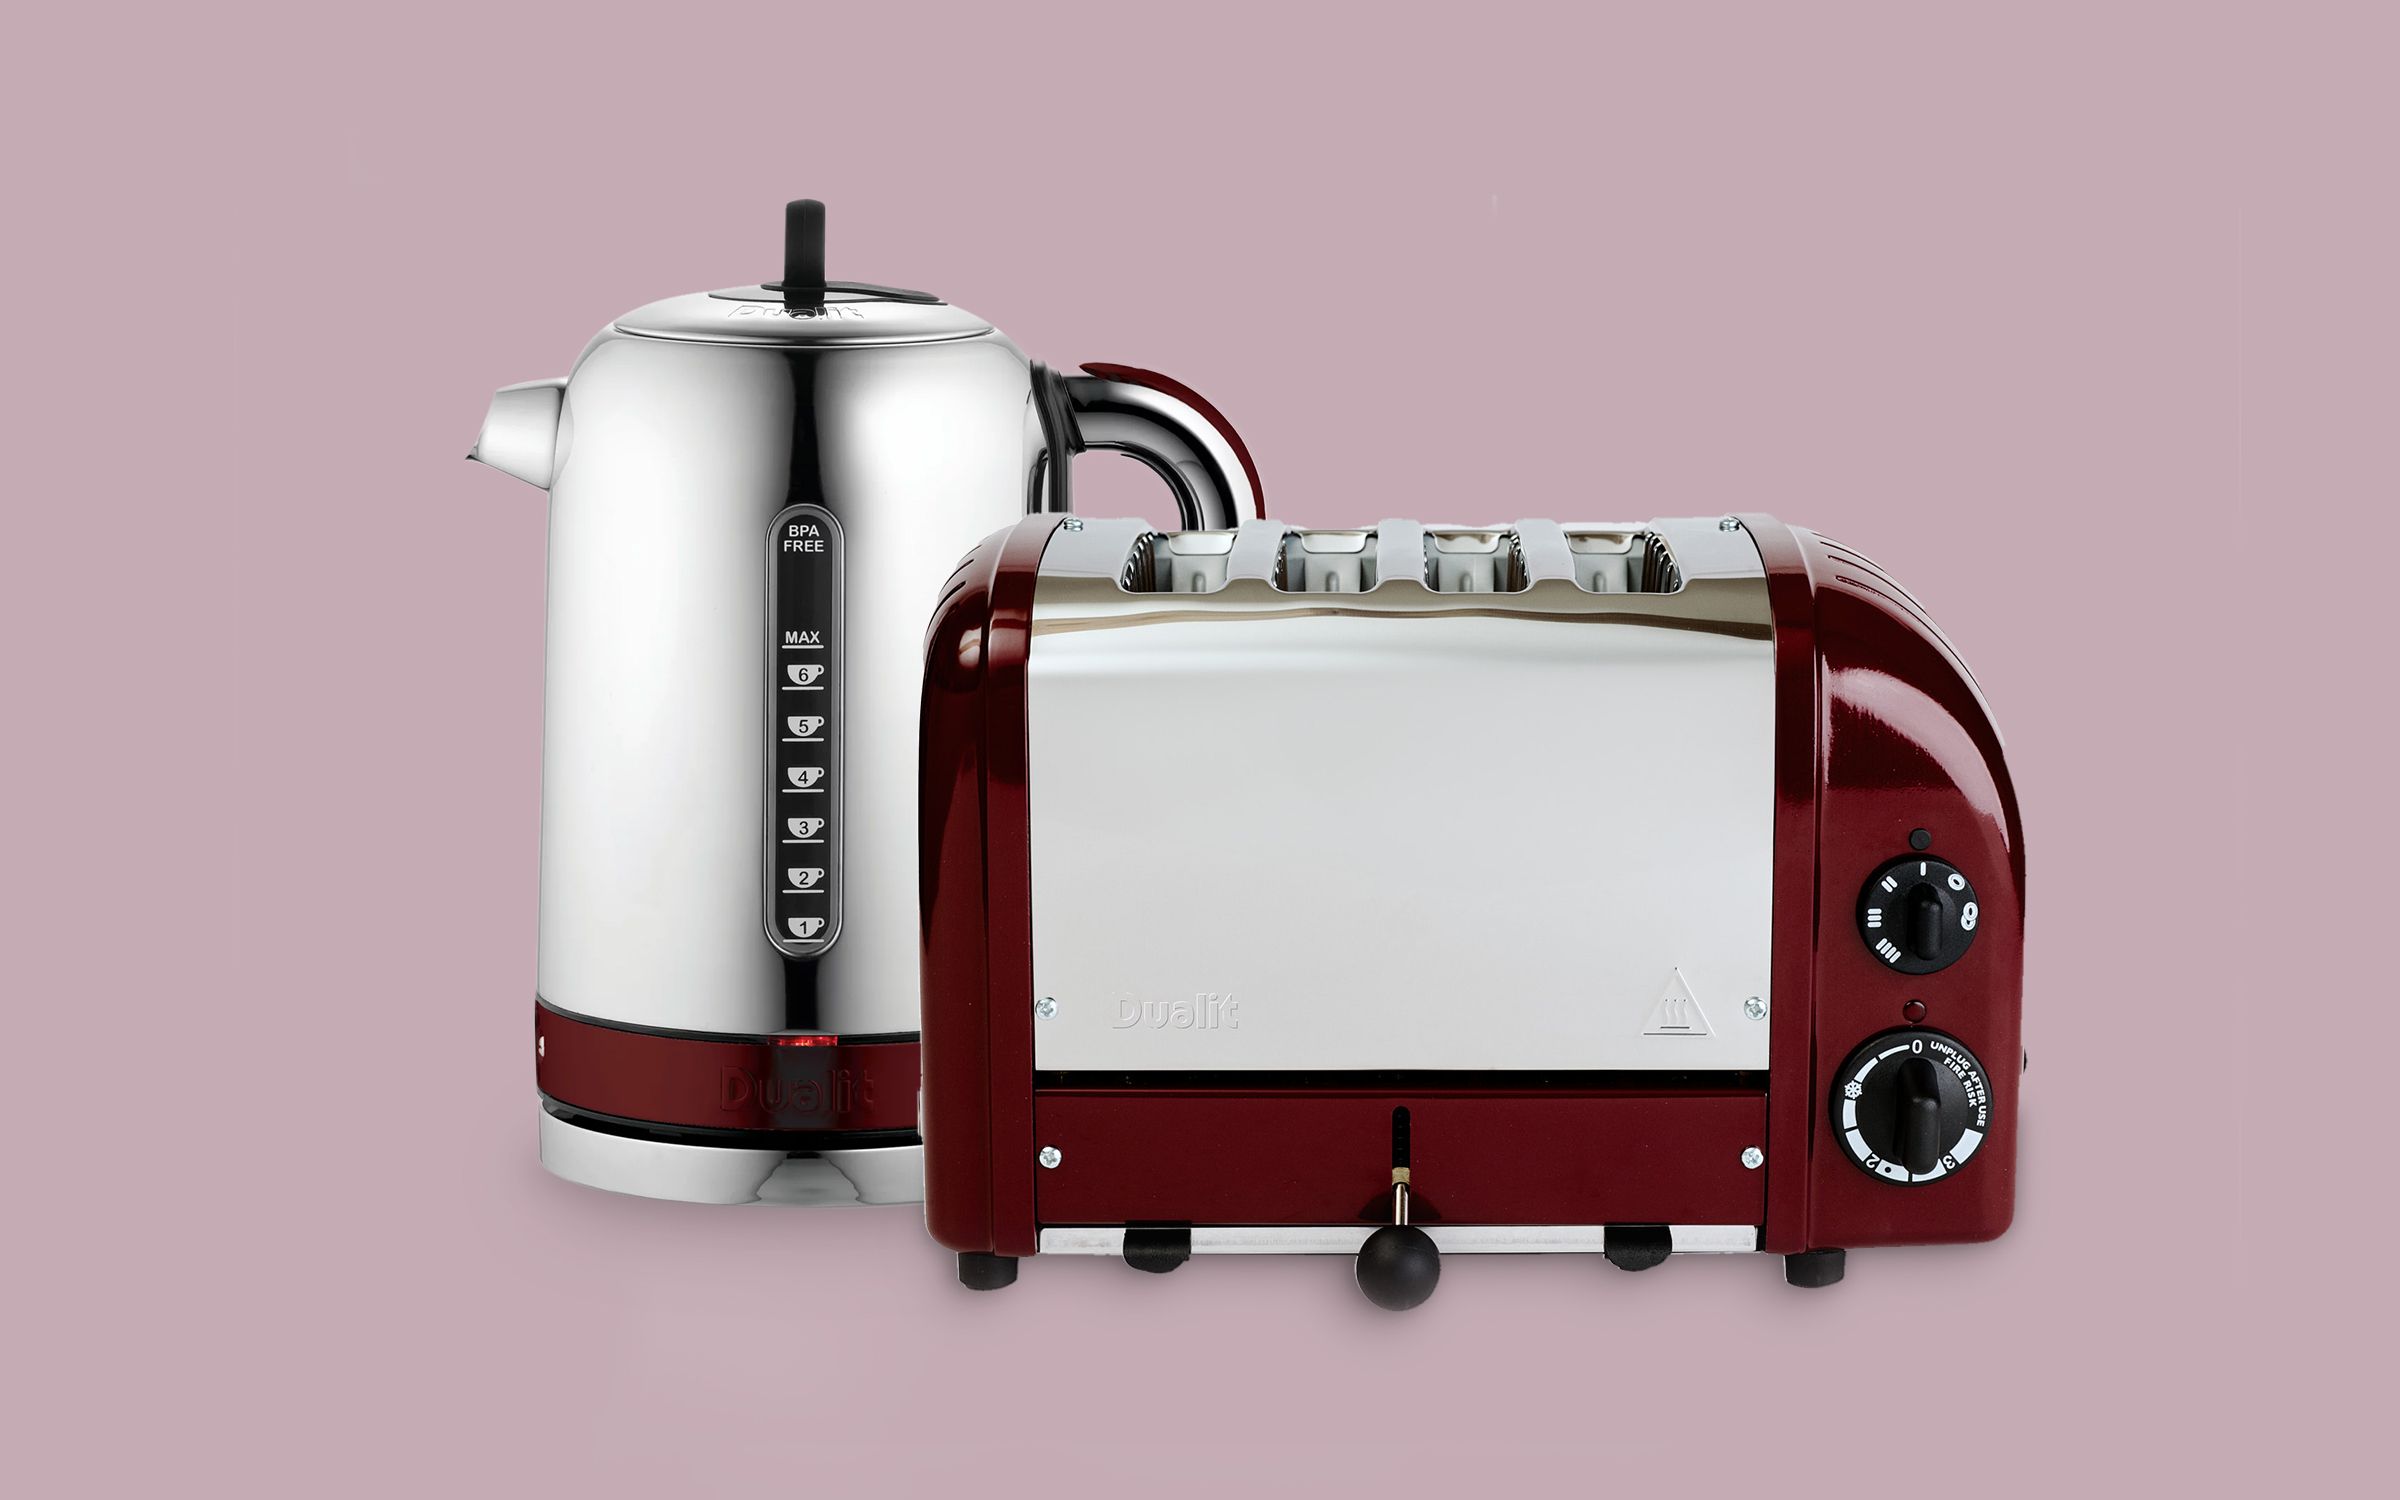 https://johnlewis.scene7.com/is/image/JohnLewis/editorial-tried-tested-dualit-classic-kettle-and-toaster-hero-251023